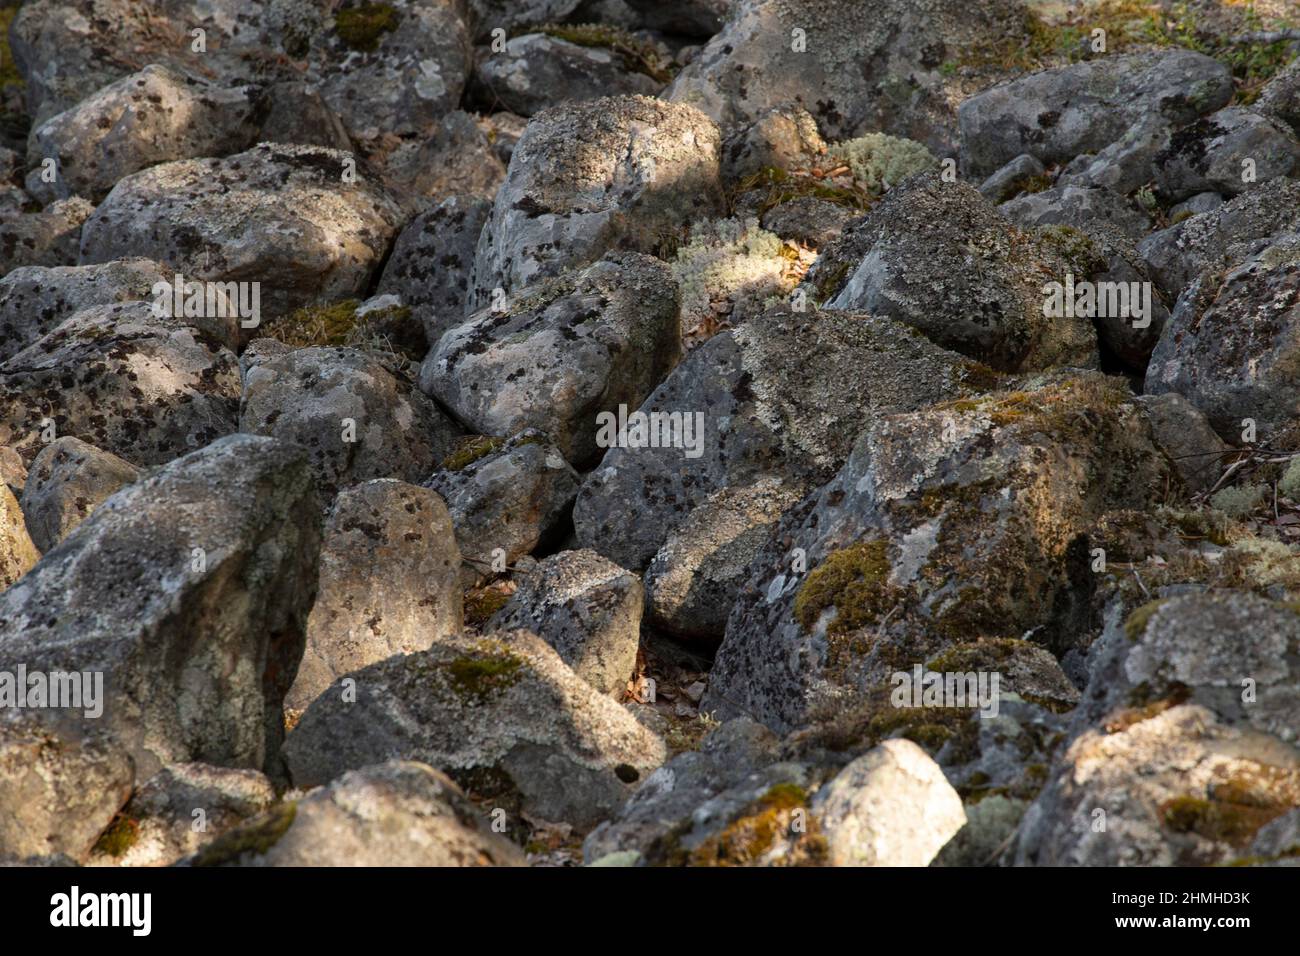 Large gray rocks by the lake, rocky ground, Finland Stock Photo